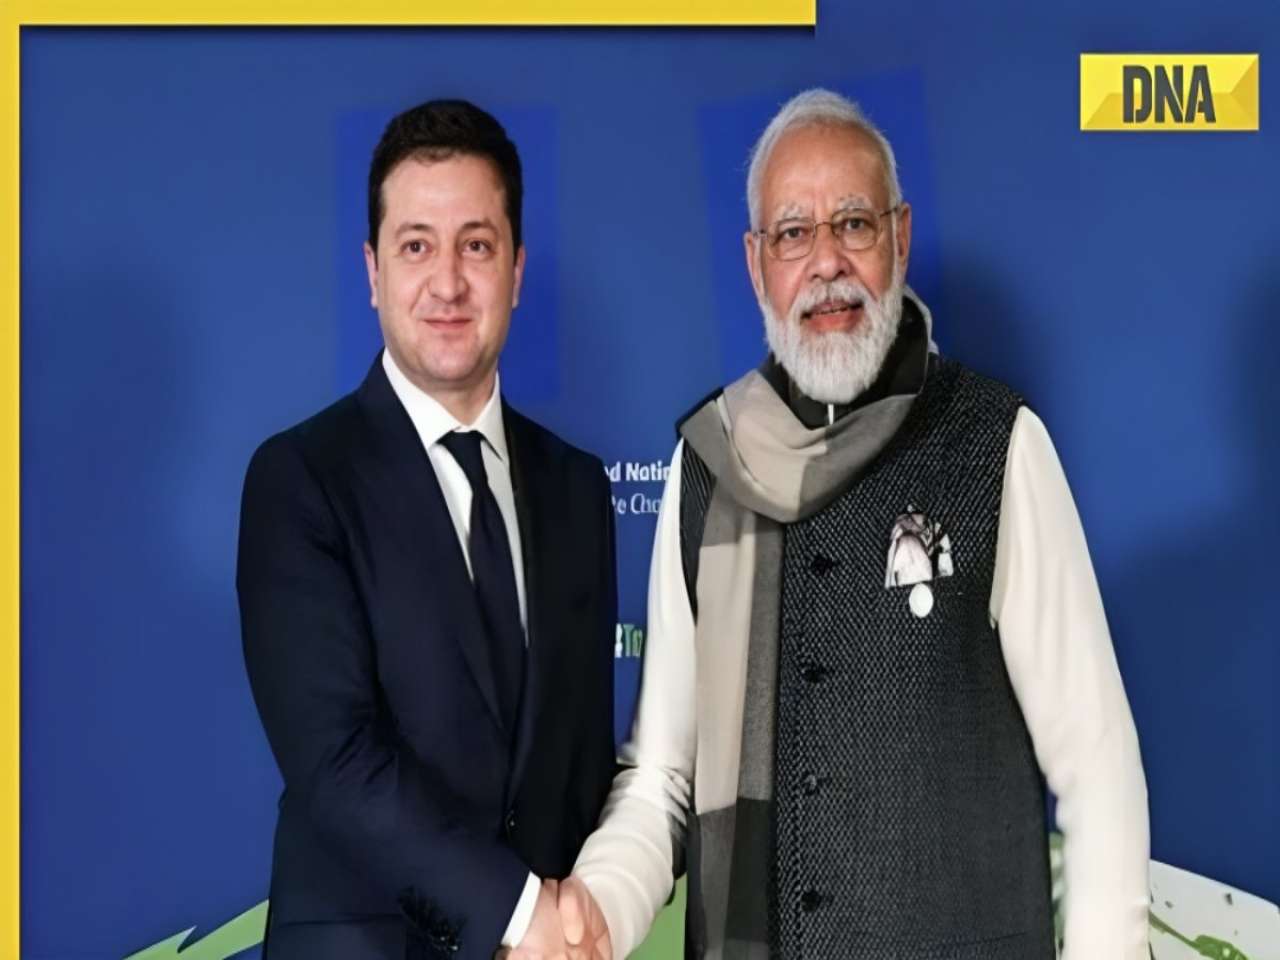 PM Modi to Zelensky: 'India supports all efforts for early, peaceful resolution of Russia-Ukraine conflict'